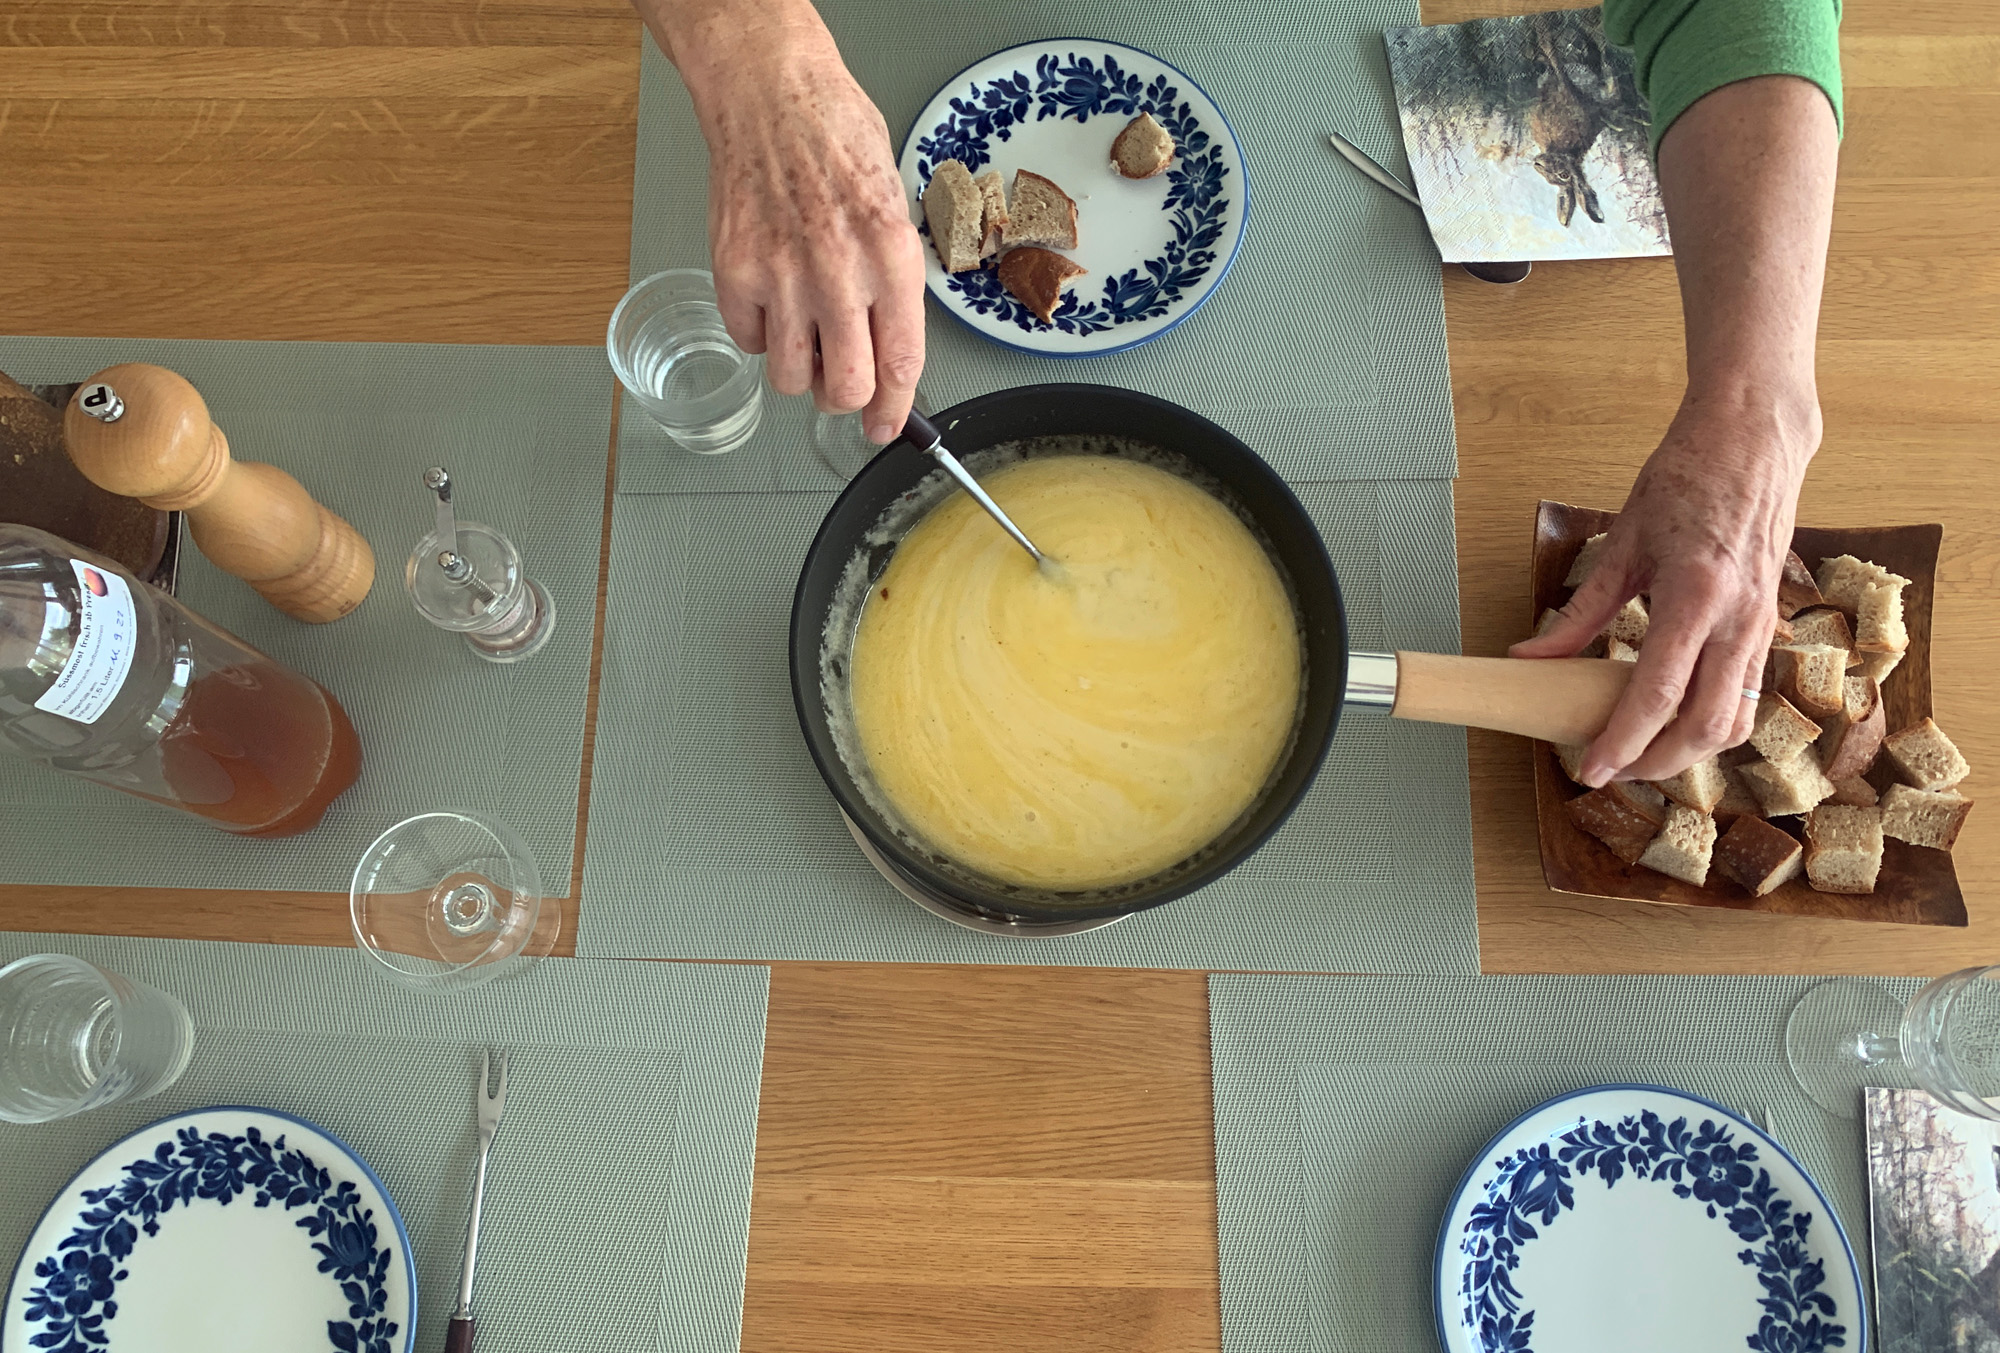 Fondue served by Hanni and René, two locals, on Sept. 17, 2022, in Lucerne, Switzerland. Leslie Ostronic joined two locals to explore Lucerne on Sept. 17, 2022.